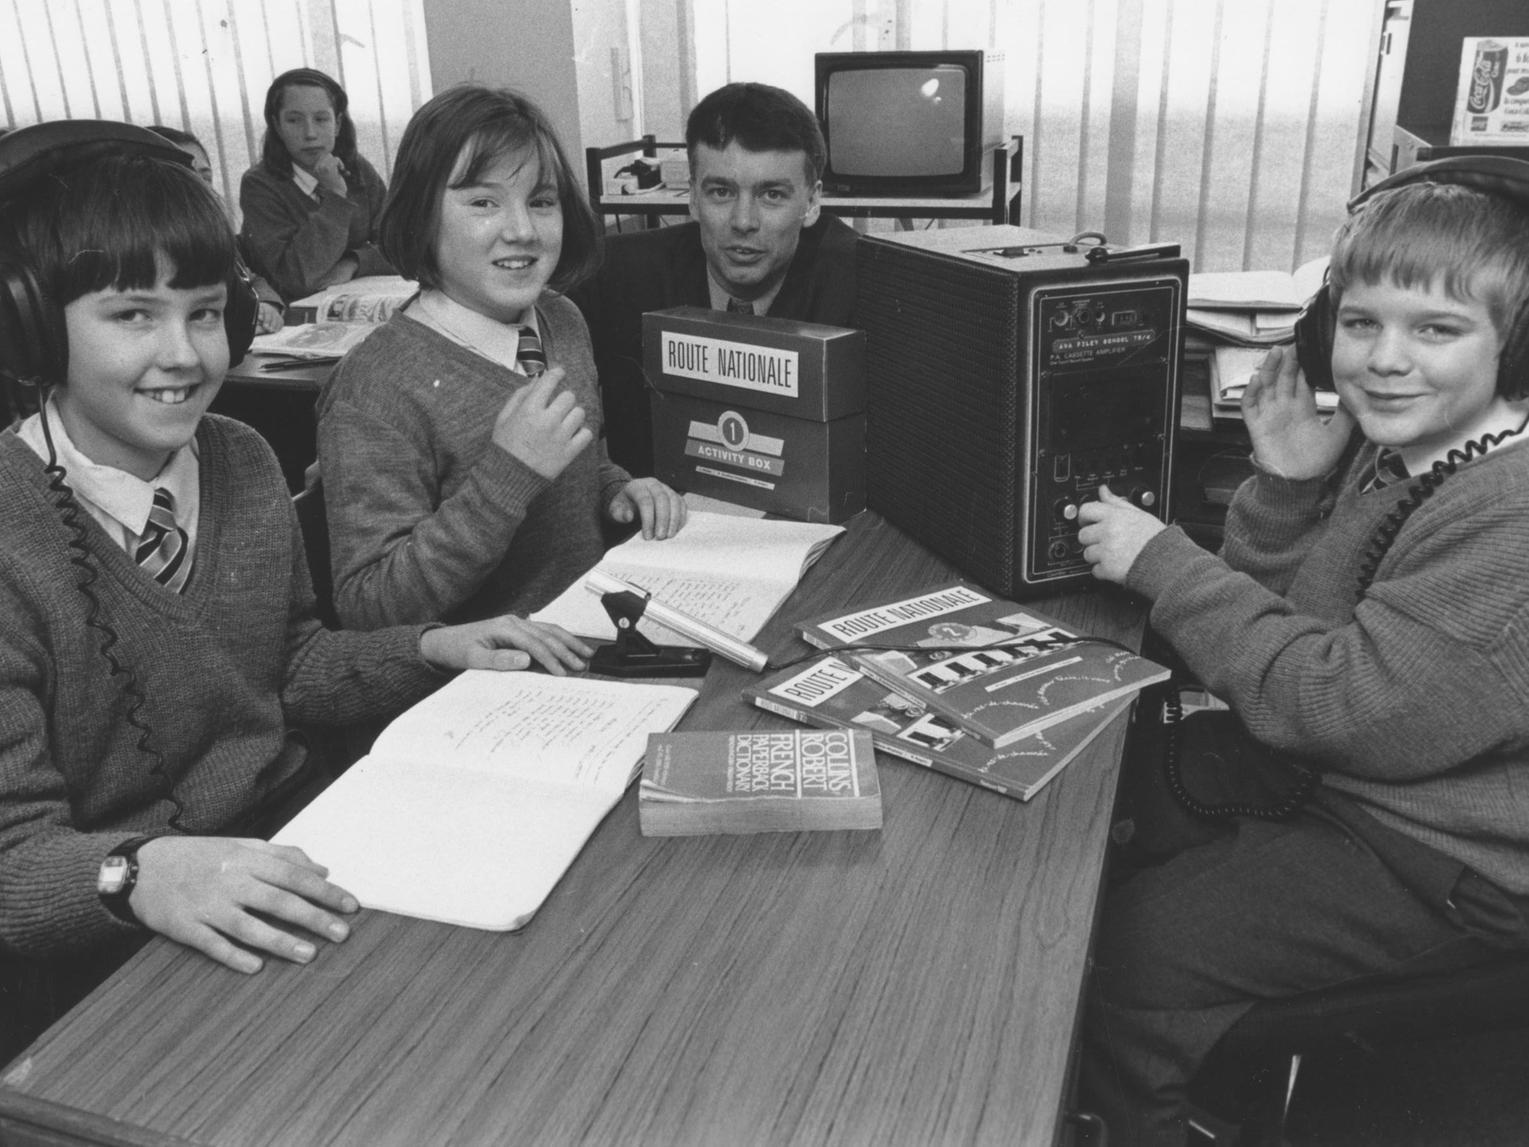 Pupils at Filey School are pictured recording samples of their French work onto tape in a mock recording session back in January 1994. Left to right are Stephen Pratt, Lora Scott, French teacher Nick Messenger, and Paul Willis.